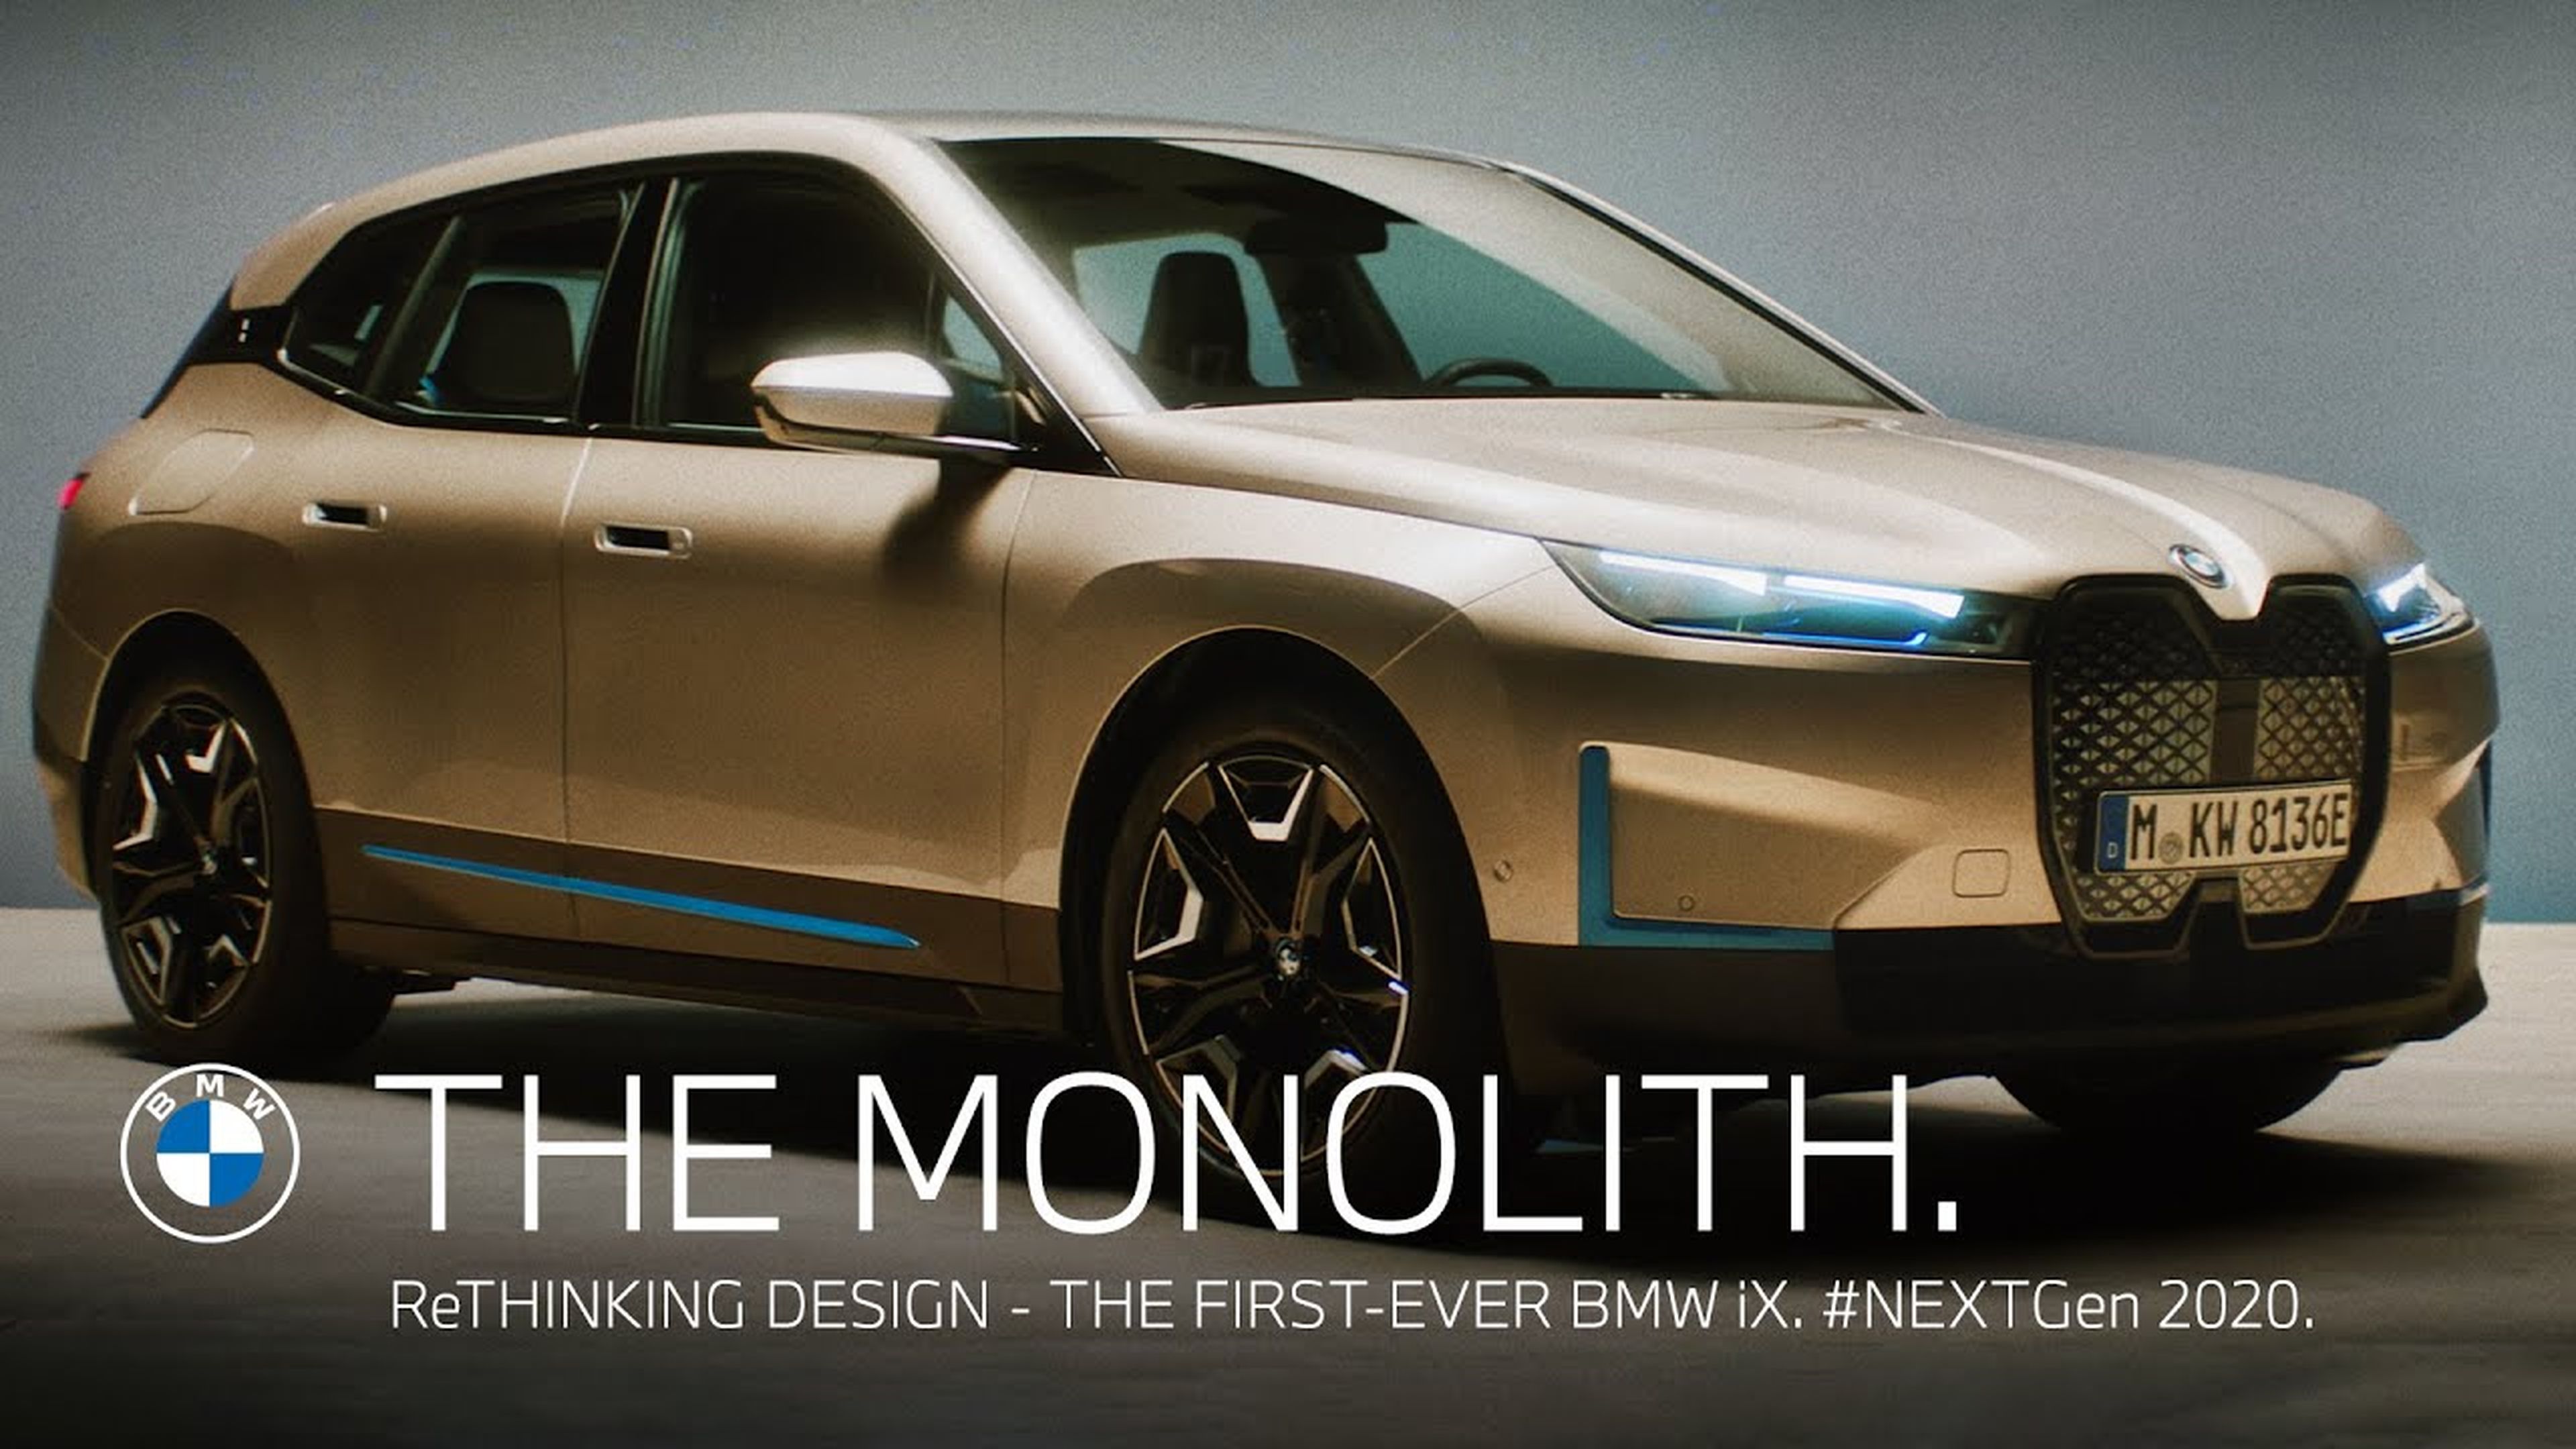 The Monolith - ReThinking Design. The first-ever BMW iX.